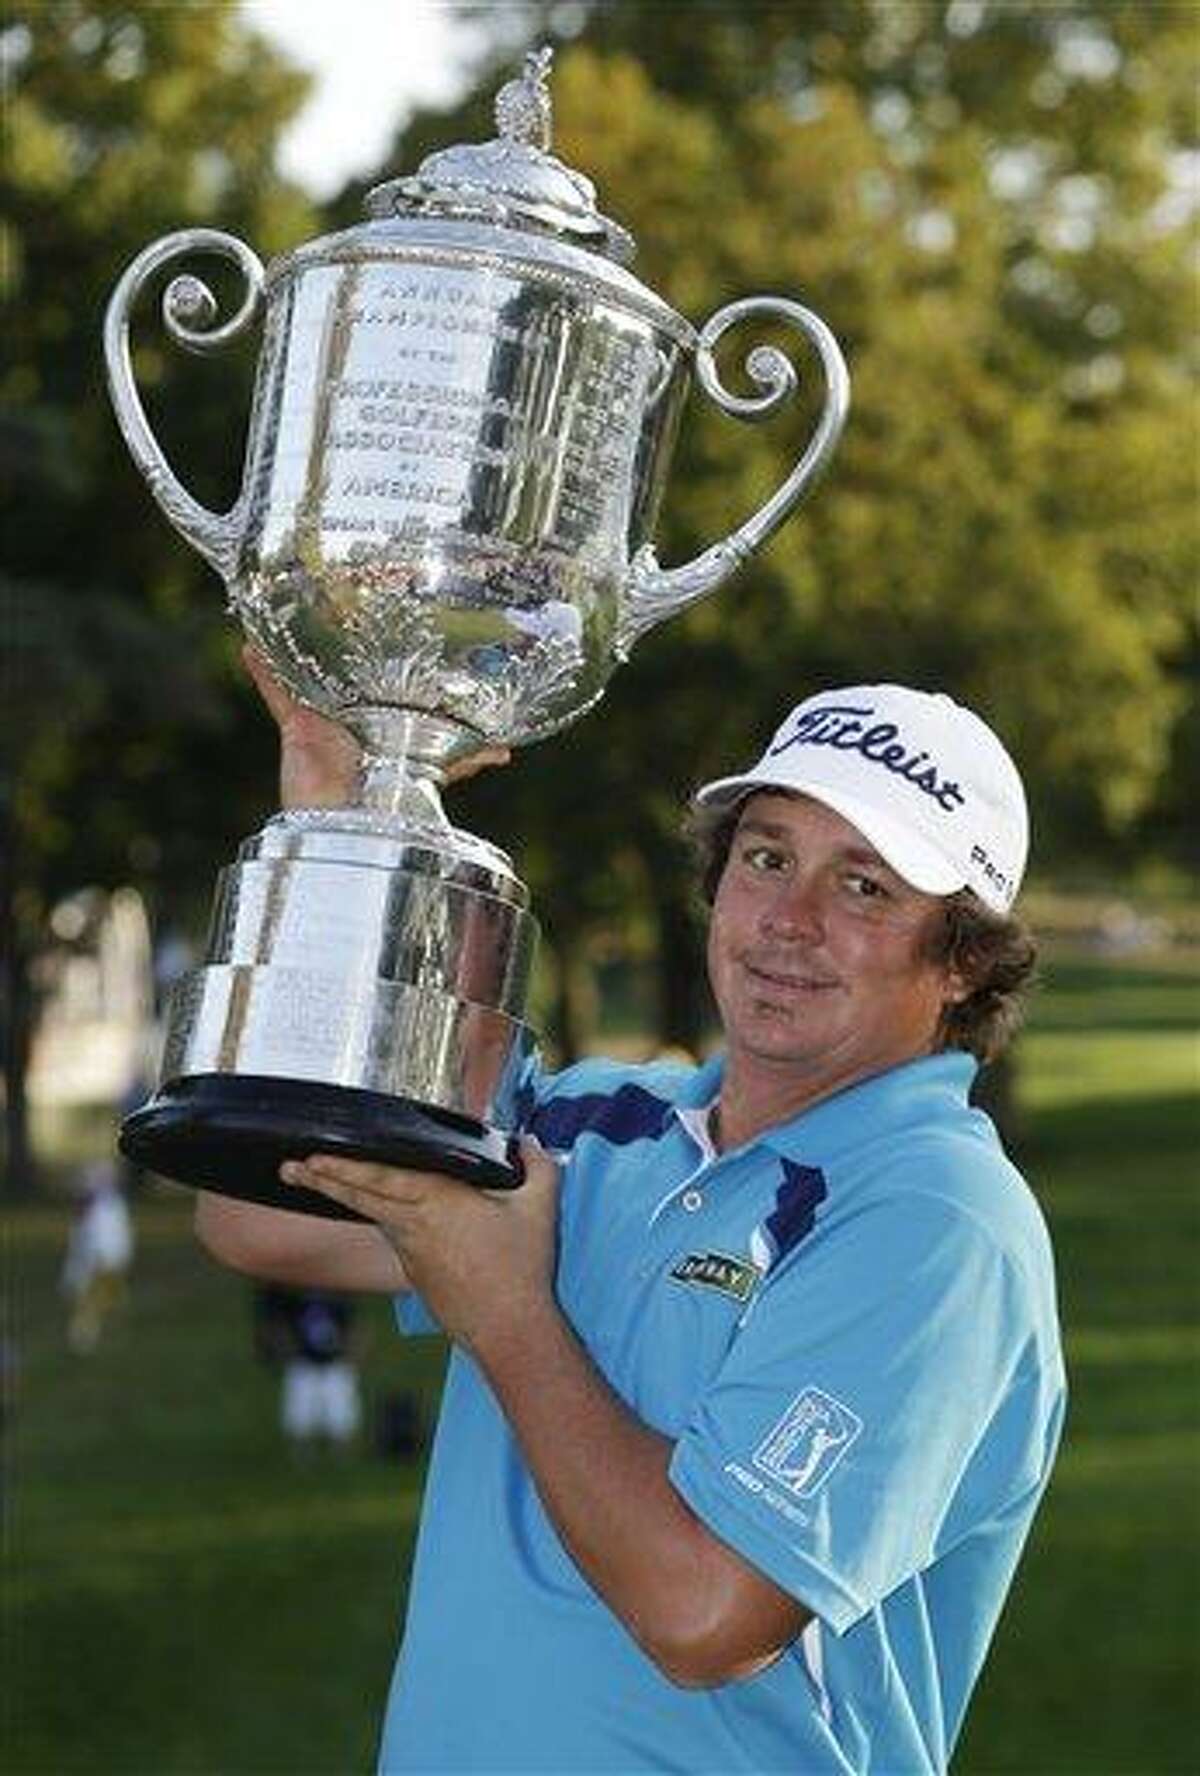 Jason Dufner holds up the Wanamaker Trophy after winning the PGA Championship golf tournament at Oak Hill Country Club, Sunday, Aug. 11, 2013, in Pittsford, N.Y. (AP Photo/Julio Cortez)